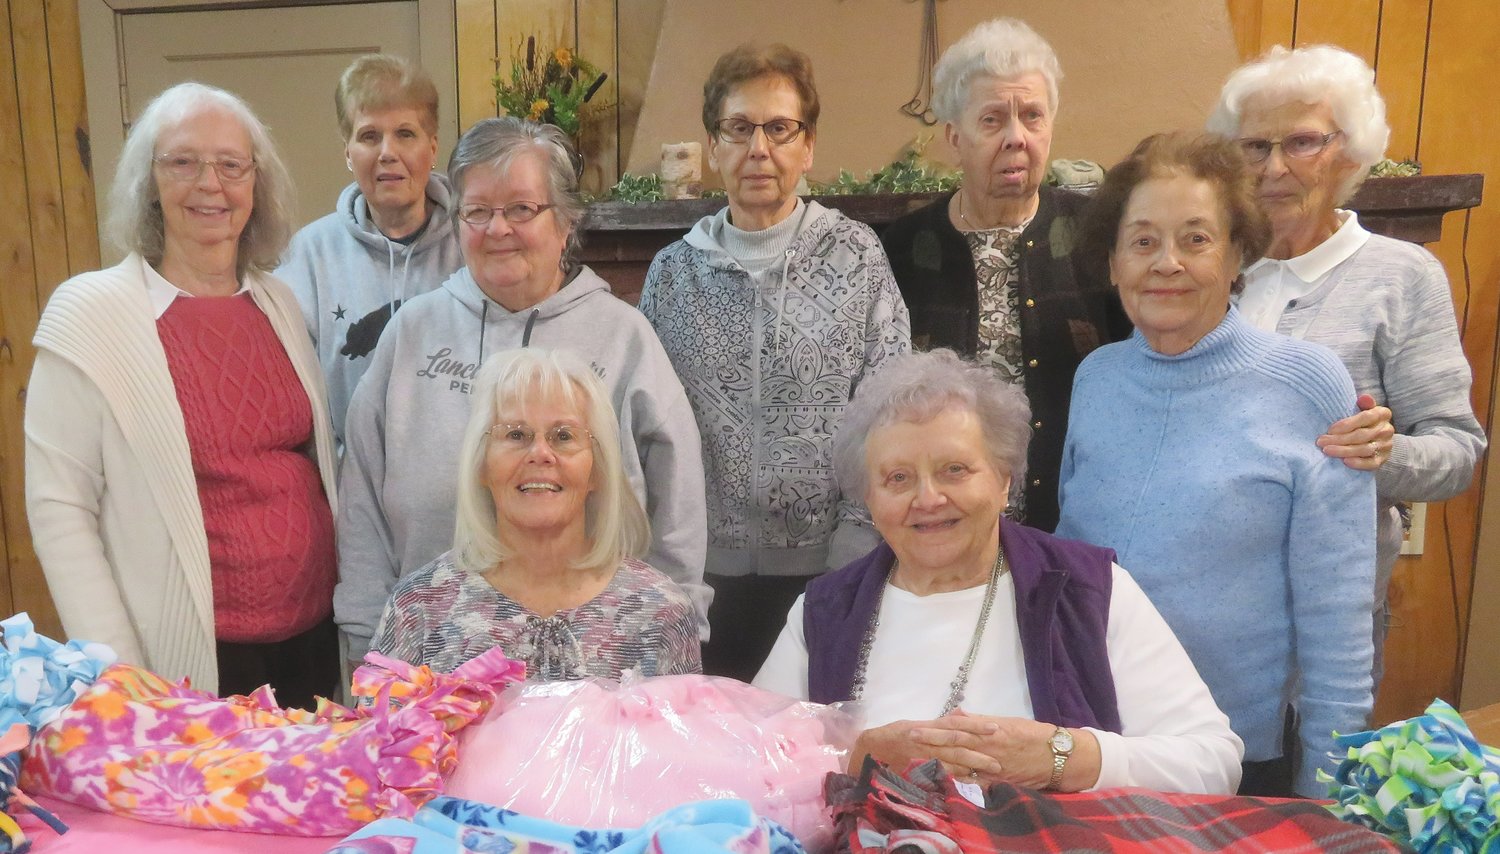 Members of the Maple Grove Extension Homemakers pose with fleece blankets.